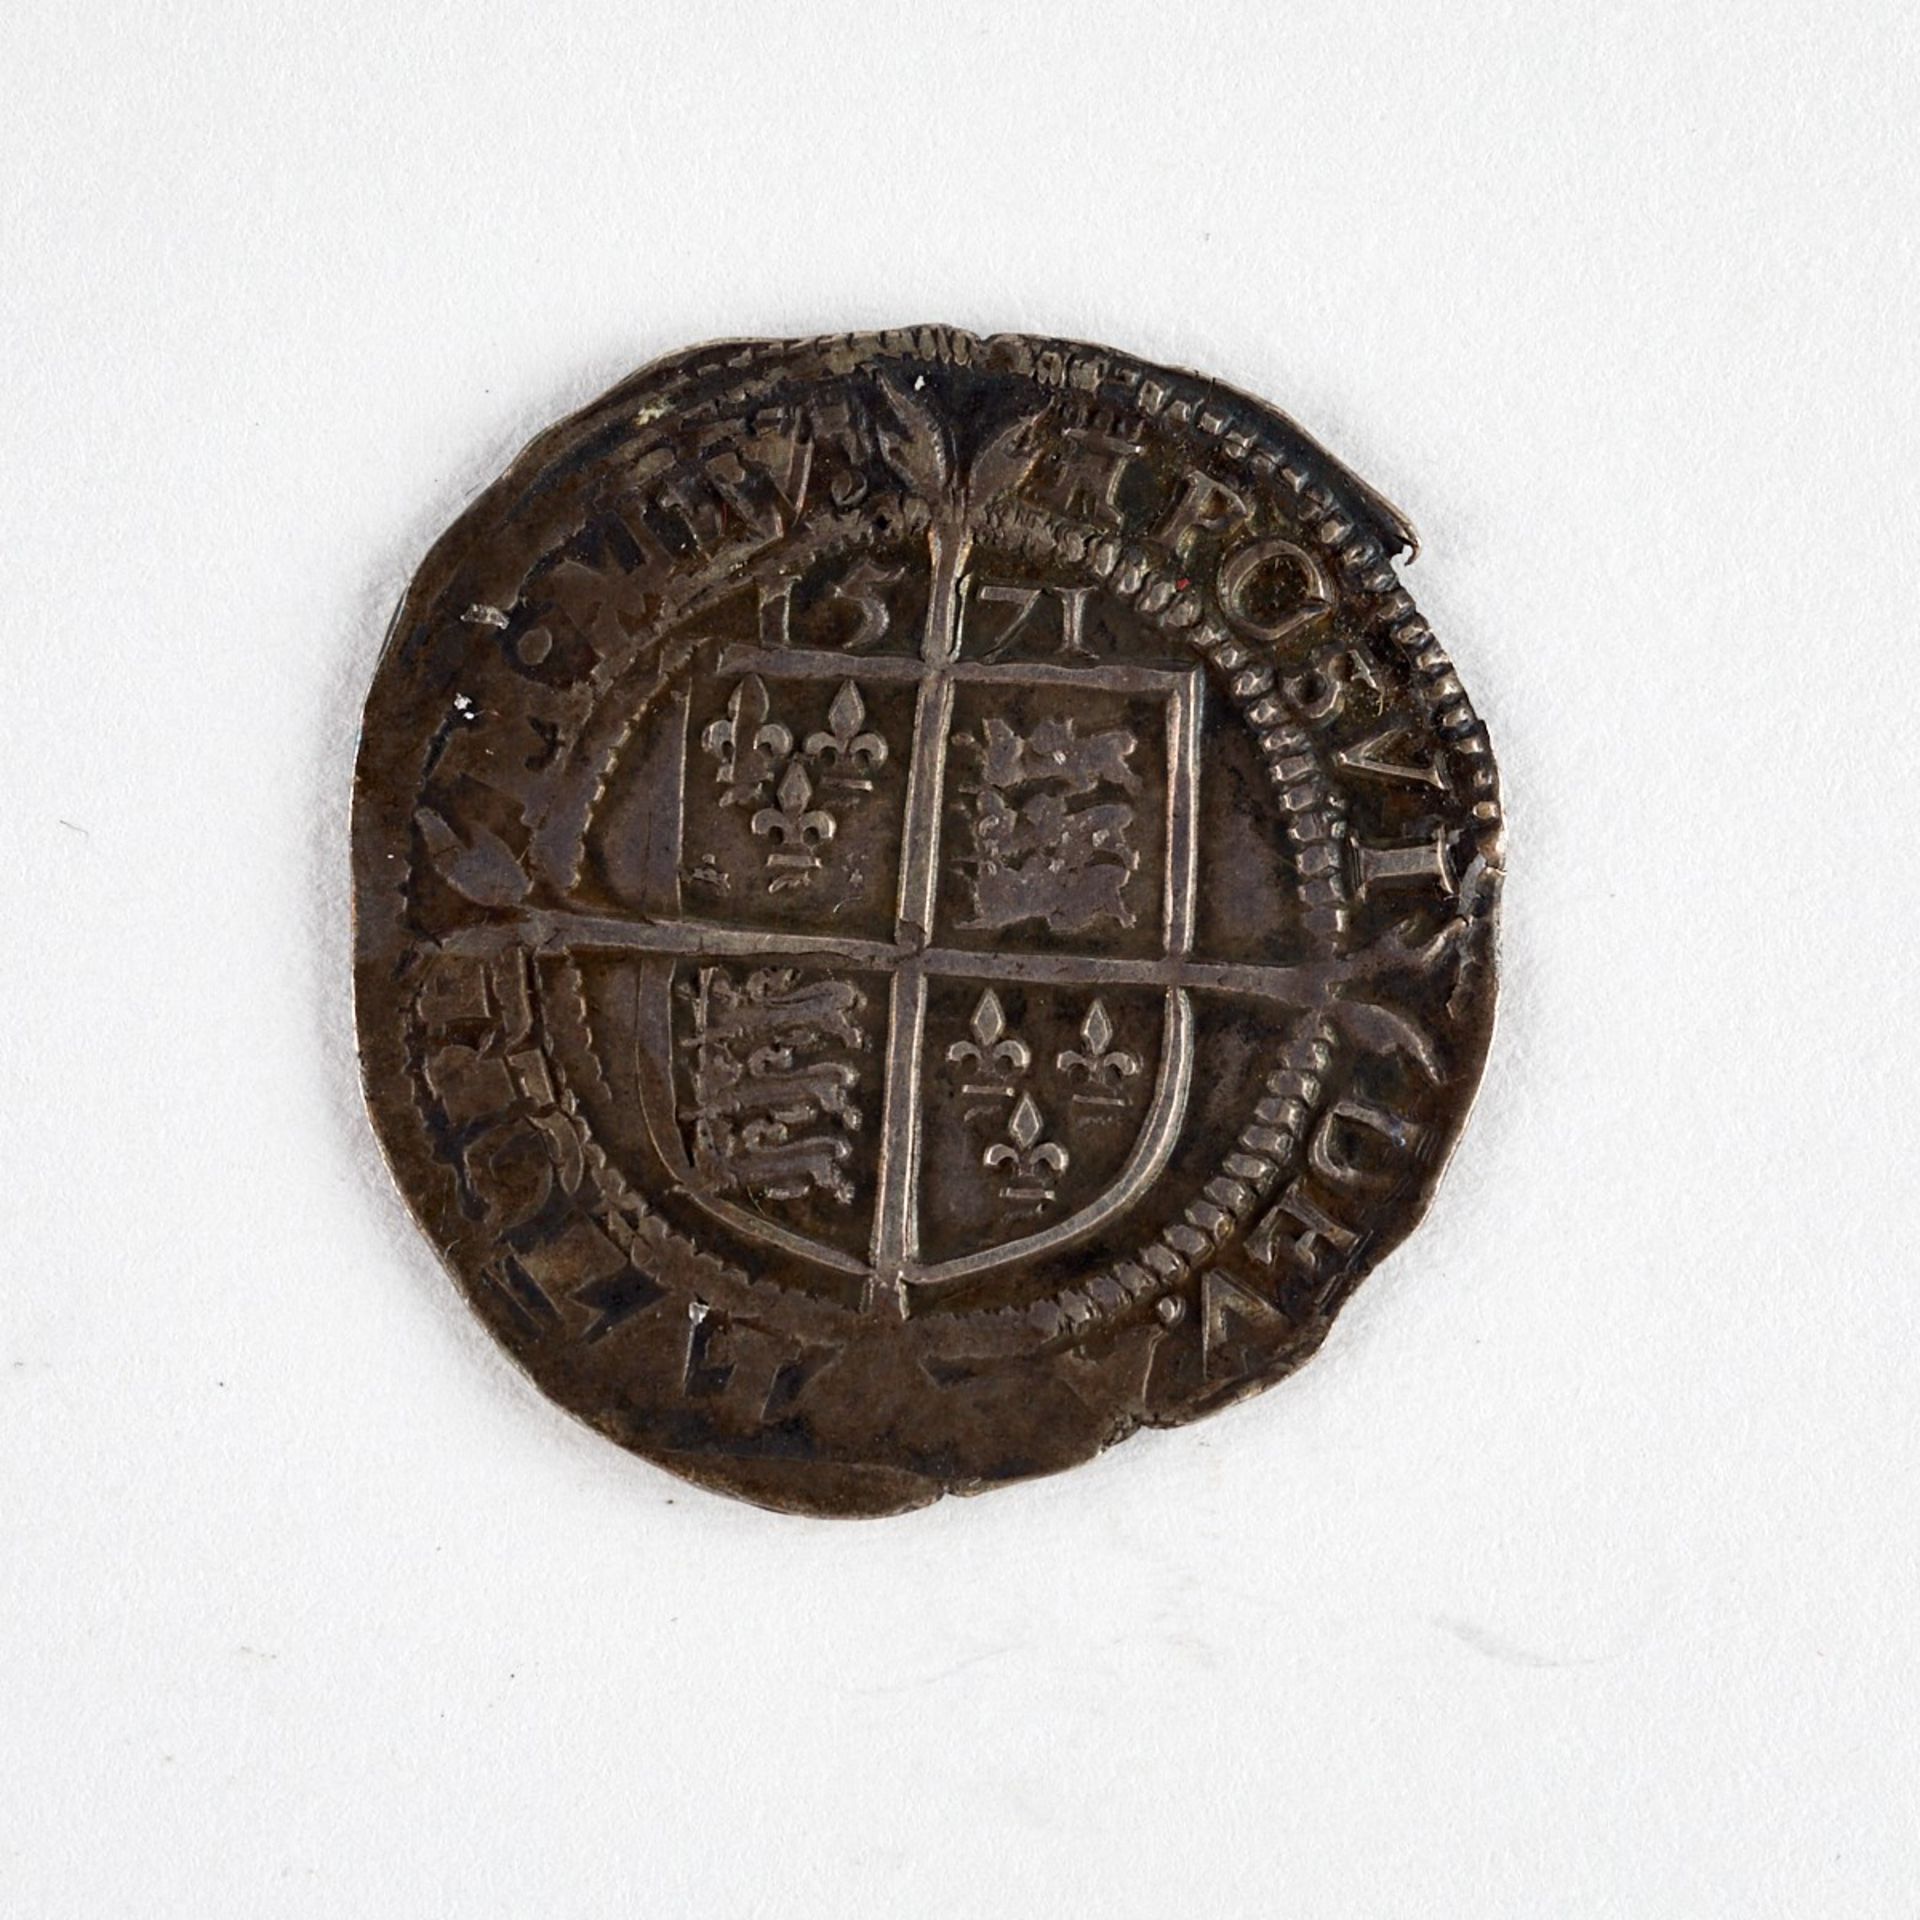 1571 Elizabeth I 3rd Issue Sixpence Crown MM - Image 3 of 3